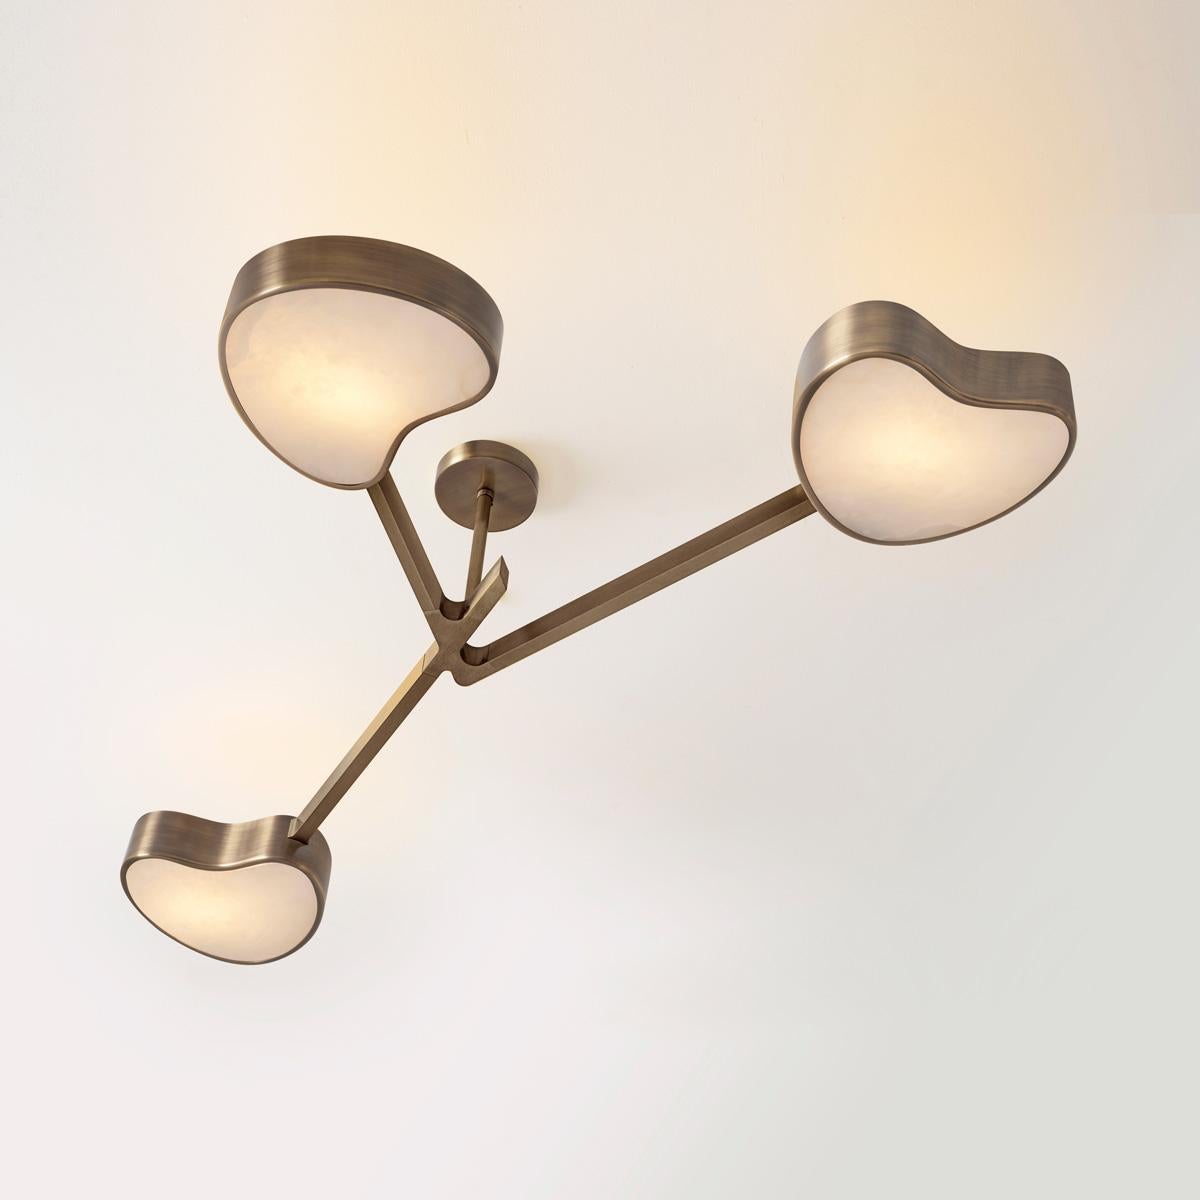 Modern Cuore N.3 Ceiling Light by Gaspare Asaro. Bronze Finish For Sale